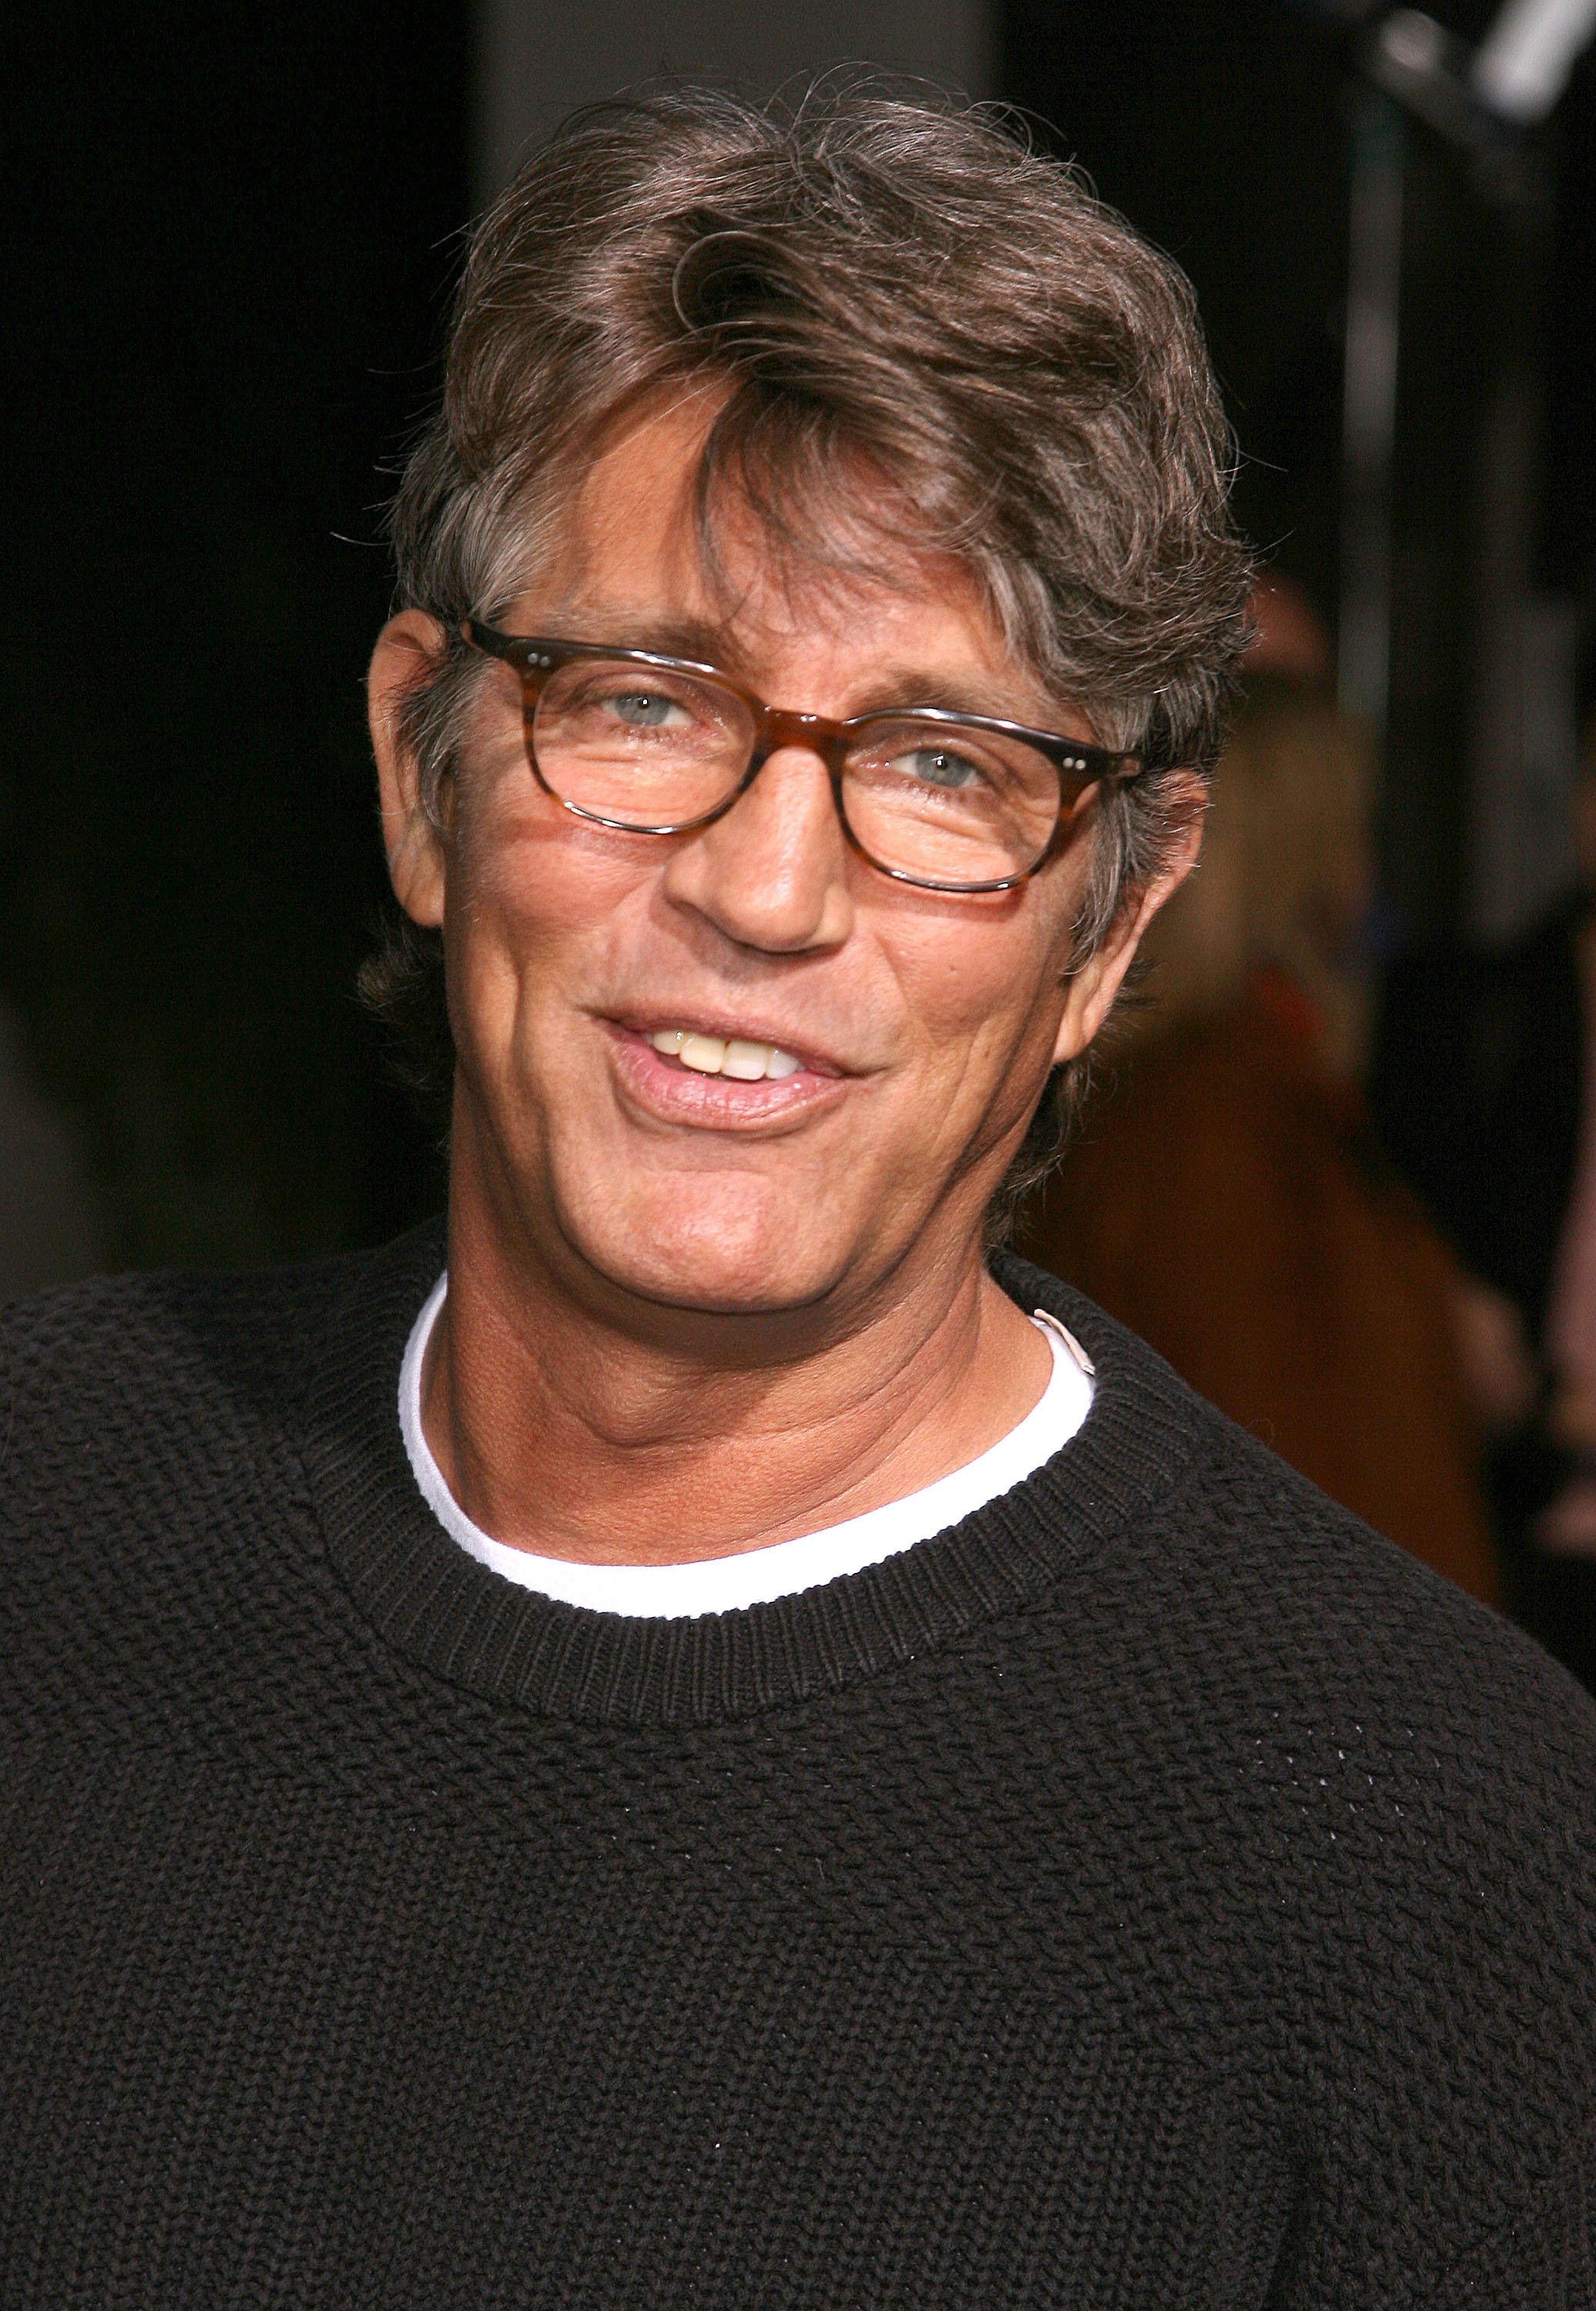 Eric Roberts during "American Dreamz" Los Angeles Premiere - Arrivals at ArcLight Hollywood in Hollywood, California, United States in April 2006 | Source: Getty Images